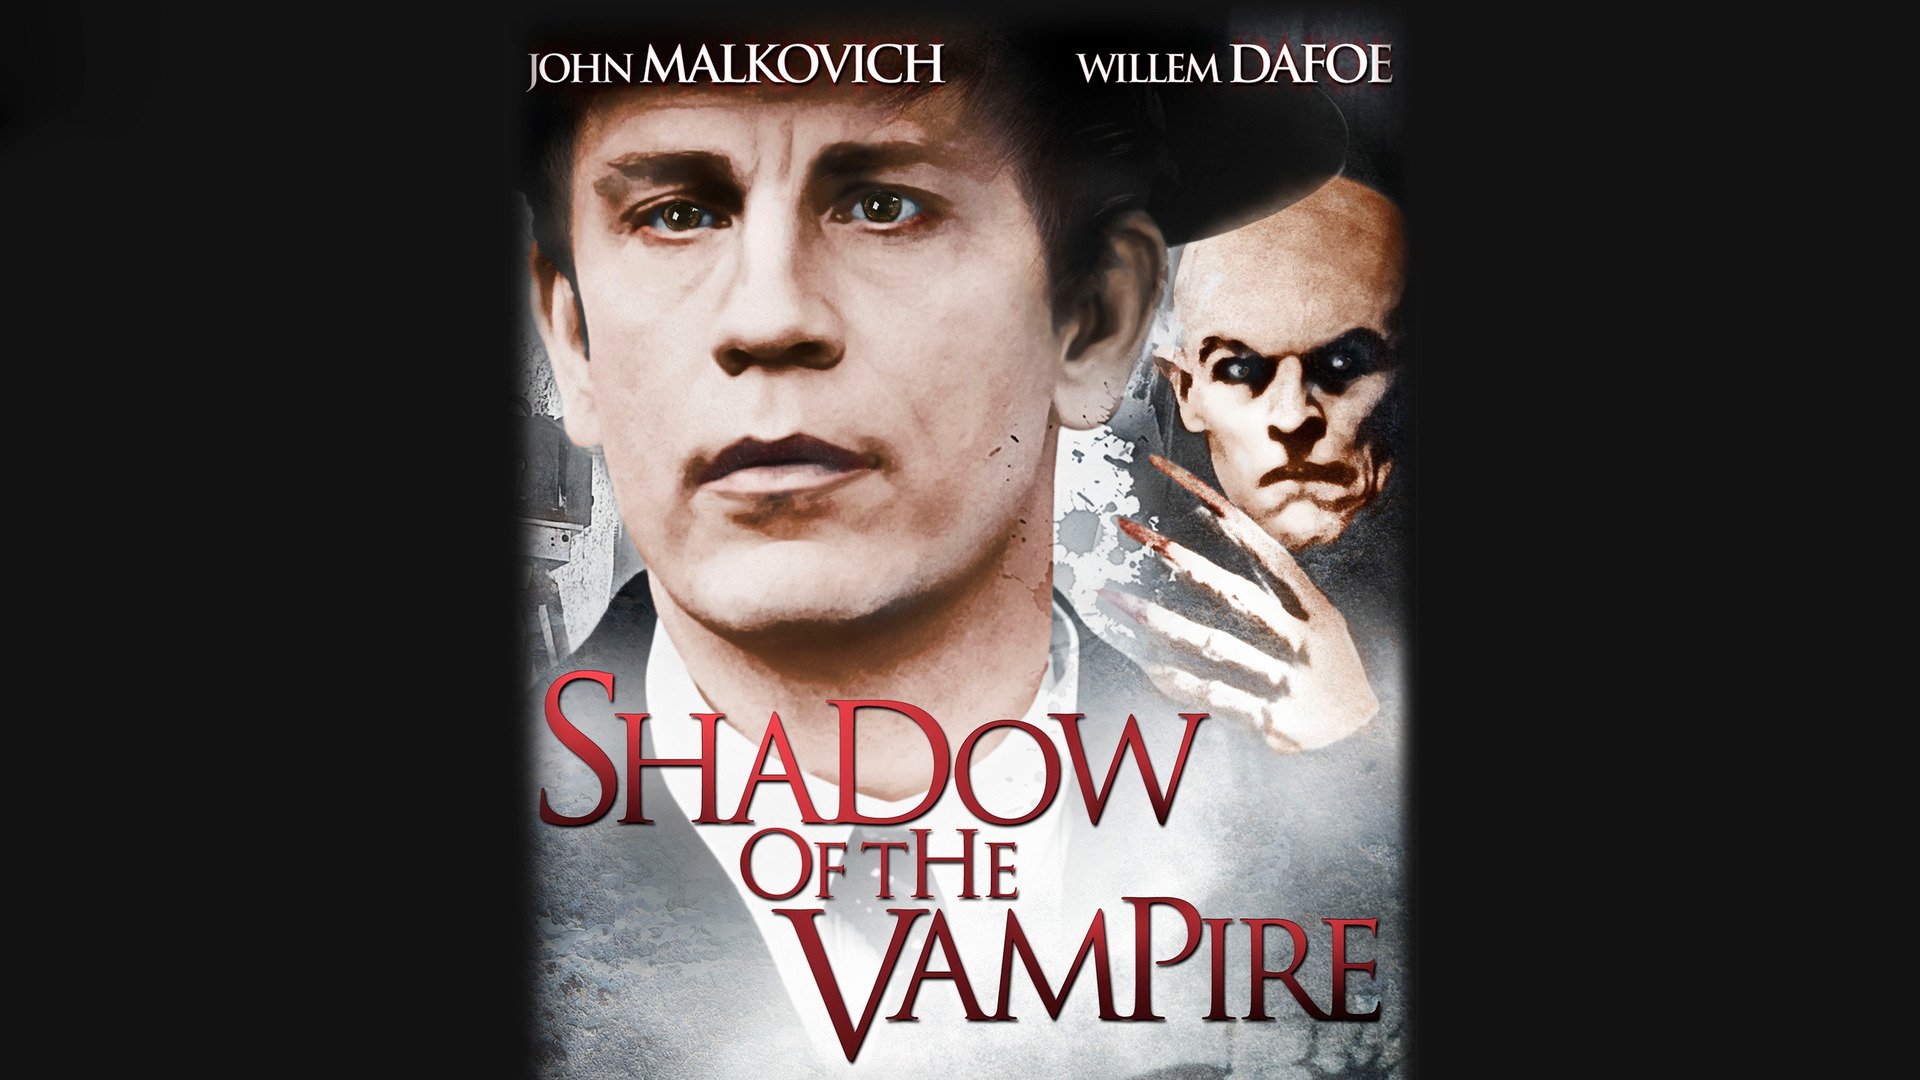 shadow of the vampire poster